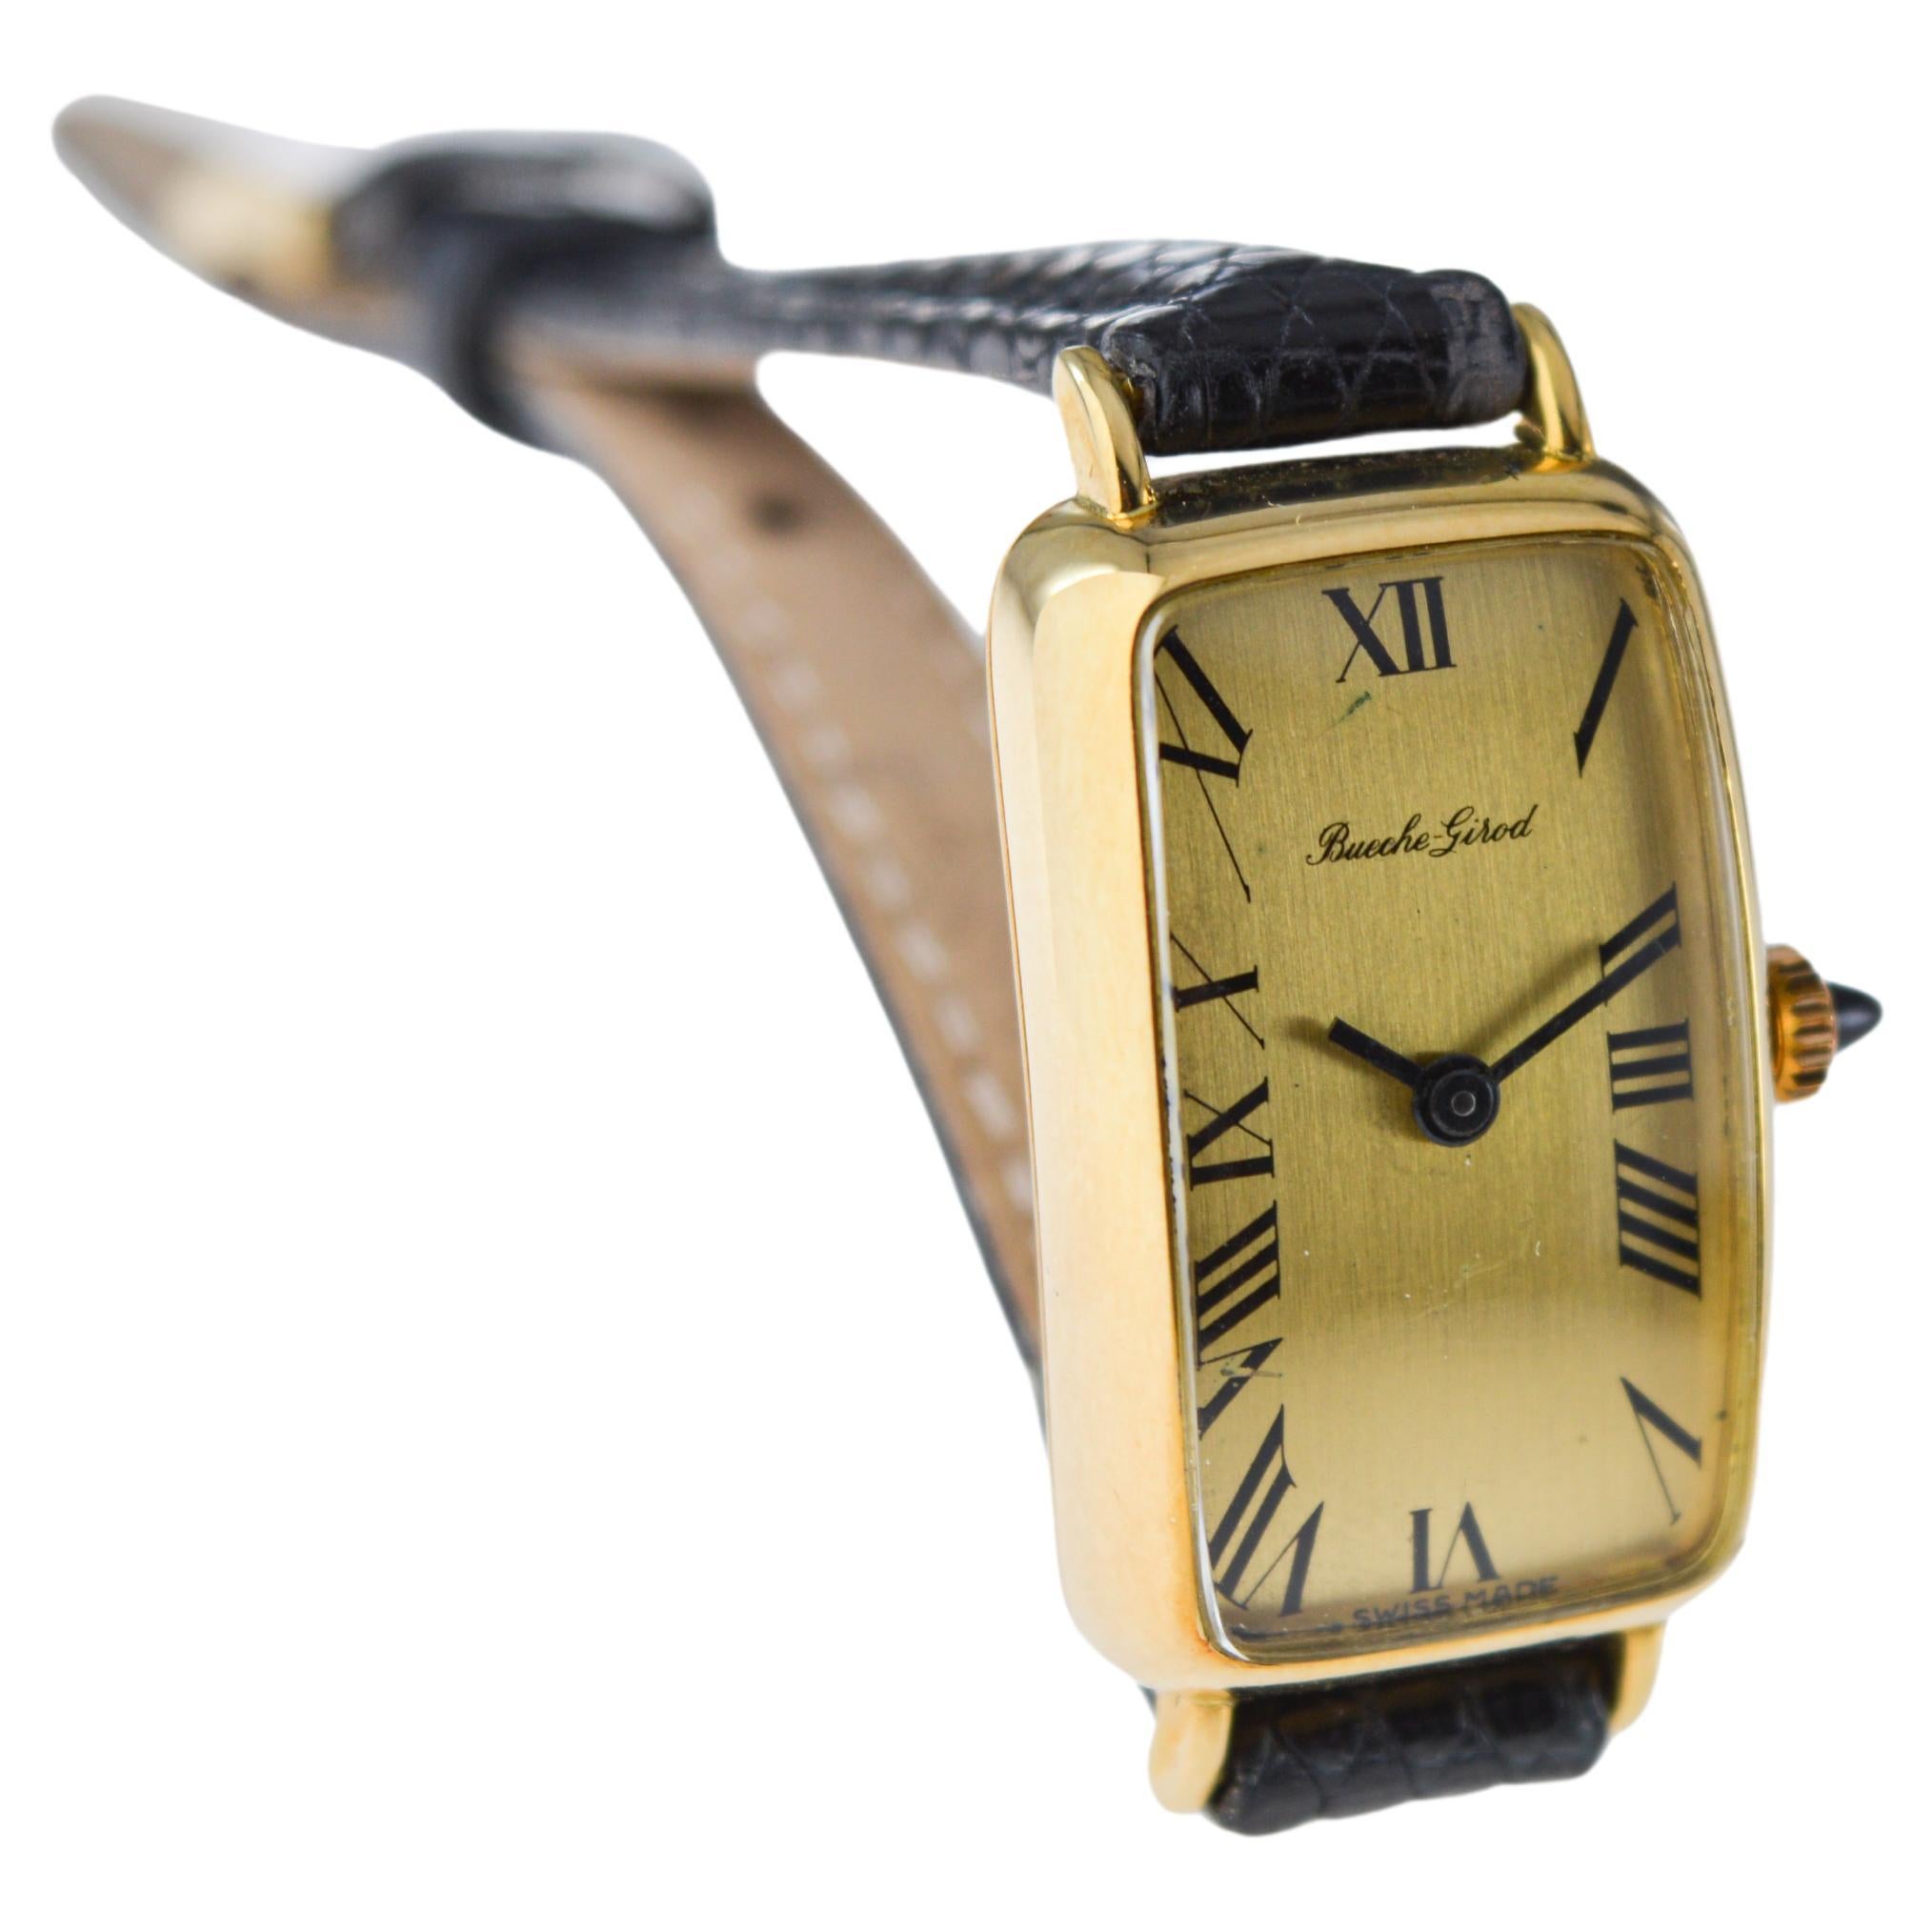 Bueche Girod 18 Karat, Yellow Midcentury Watch Originally Owned by Jerry Lewis In Excellent Condition For Sale In Long Beach, CA